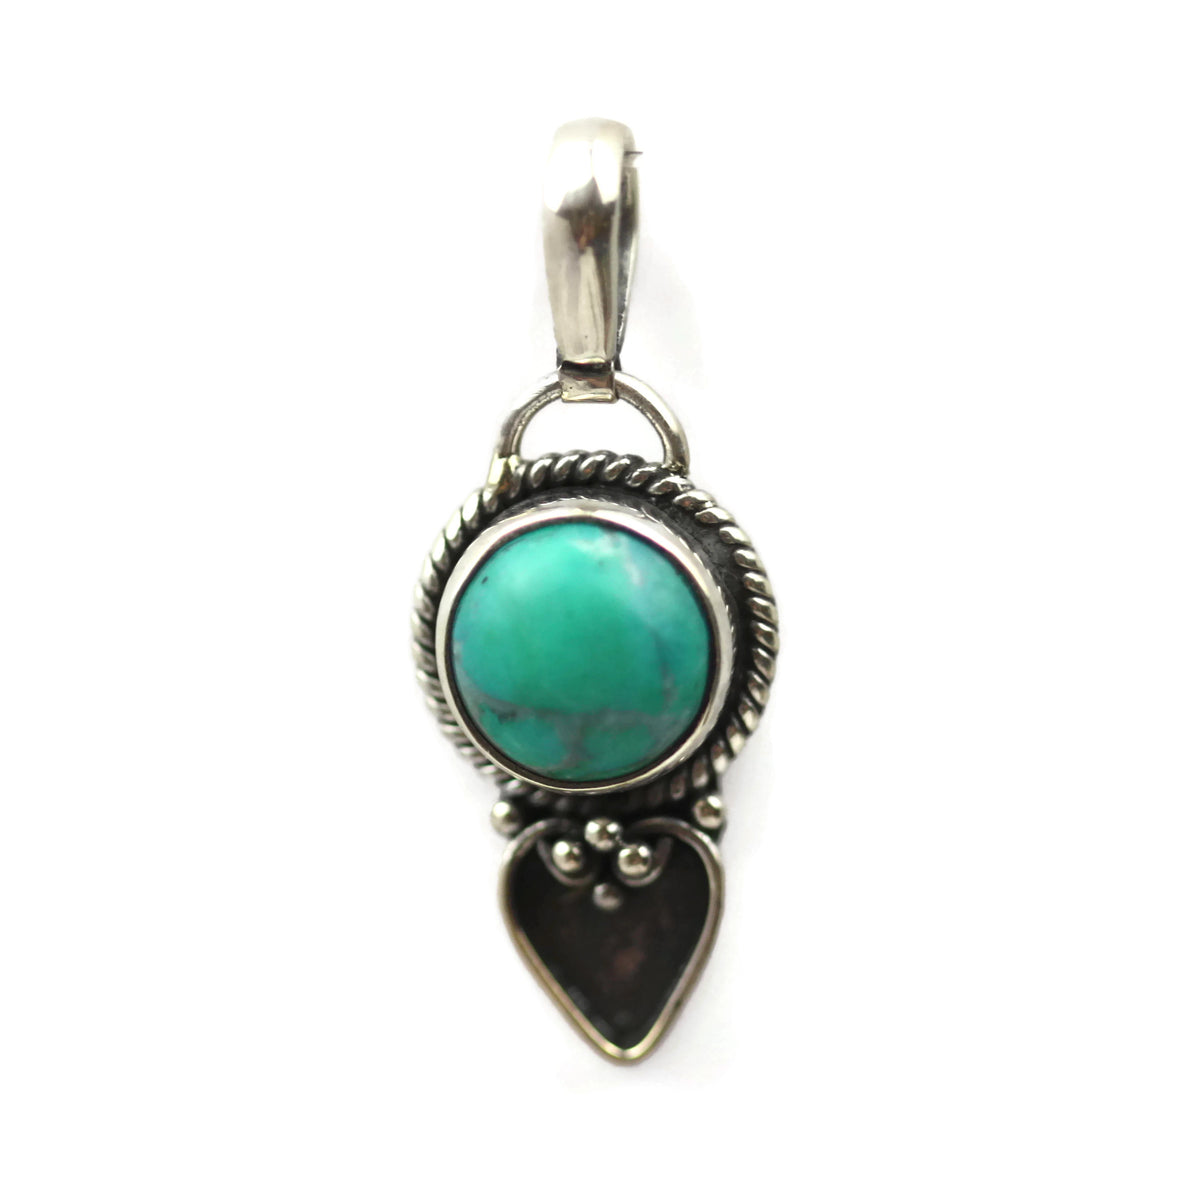 Handmade 925 Sterling Silver Turquoise Gemstone with Antique Spade Pendant